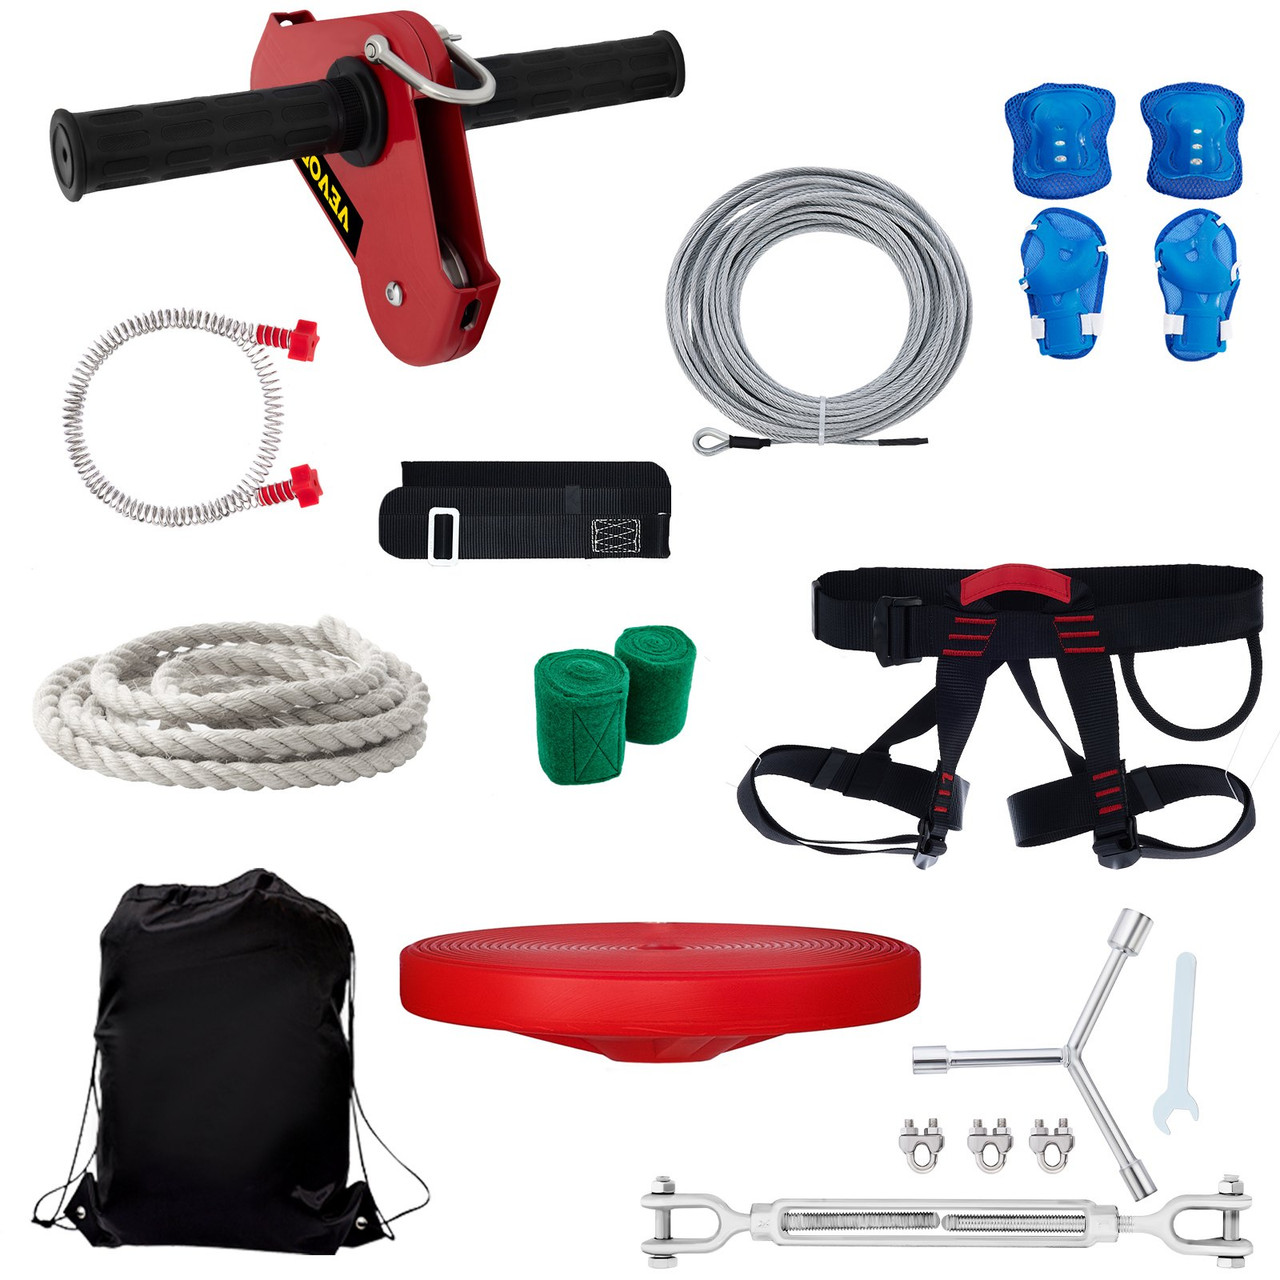 Zip line Kits for Backyard 120FT, Zip Lines for Kid and Adult, Included Swing Seat, Zip Lines Brake, and Steel Trolley, Outdoor Playground Equipment